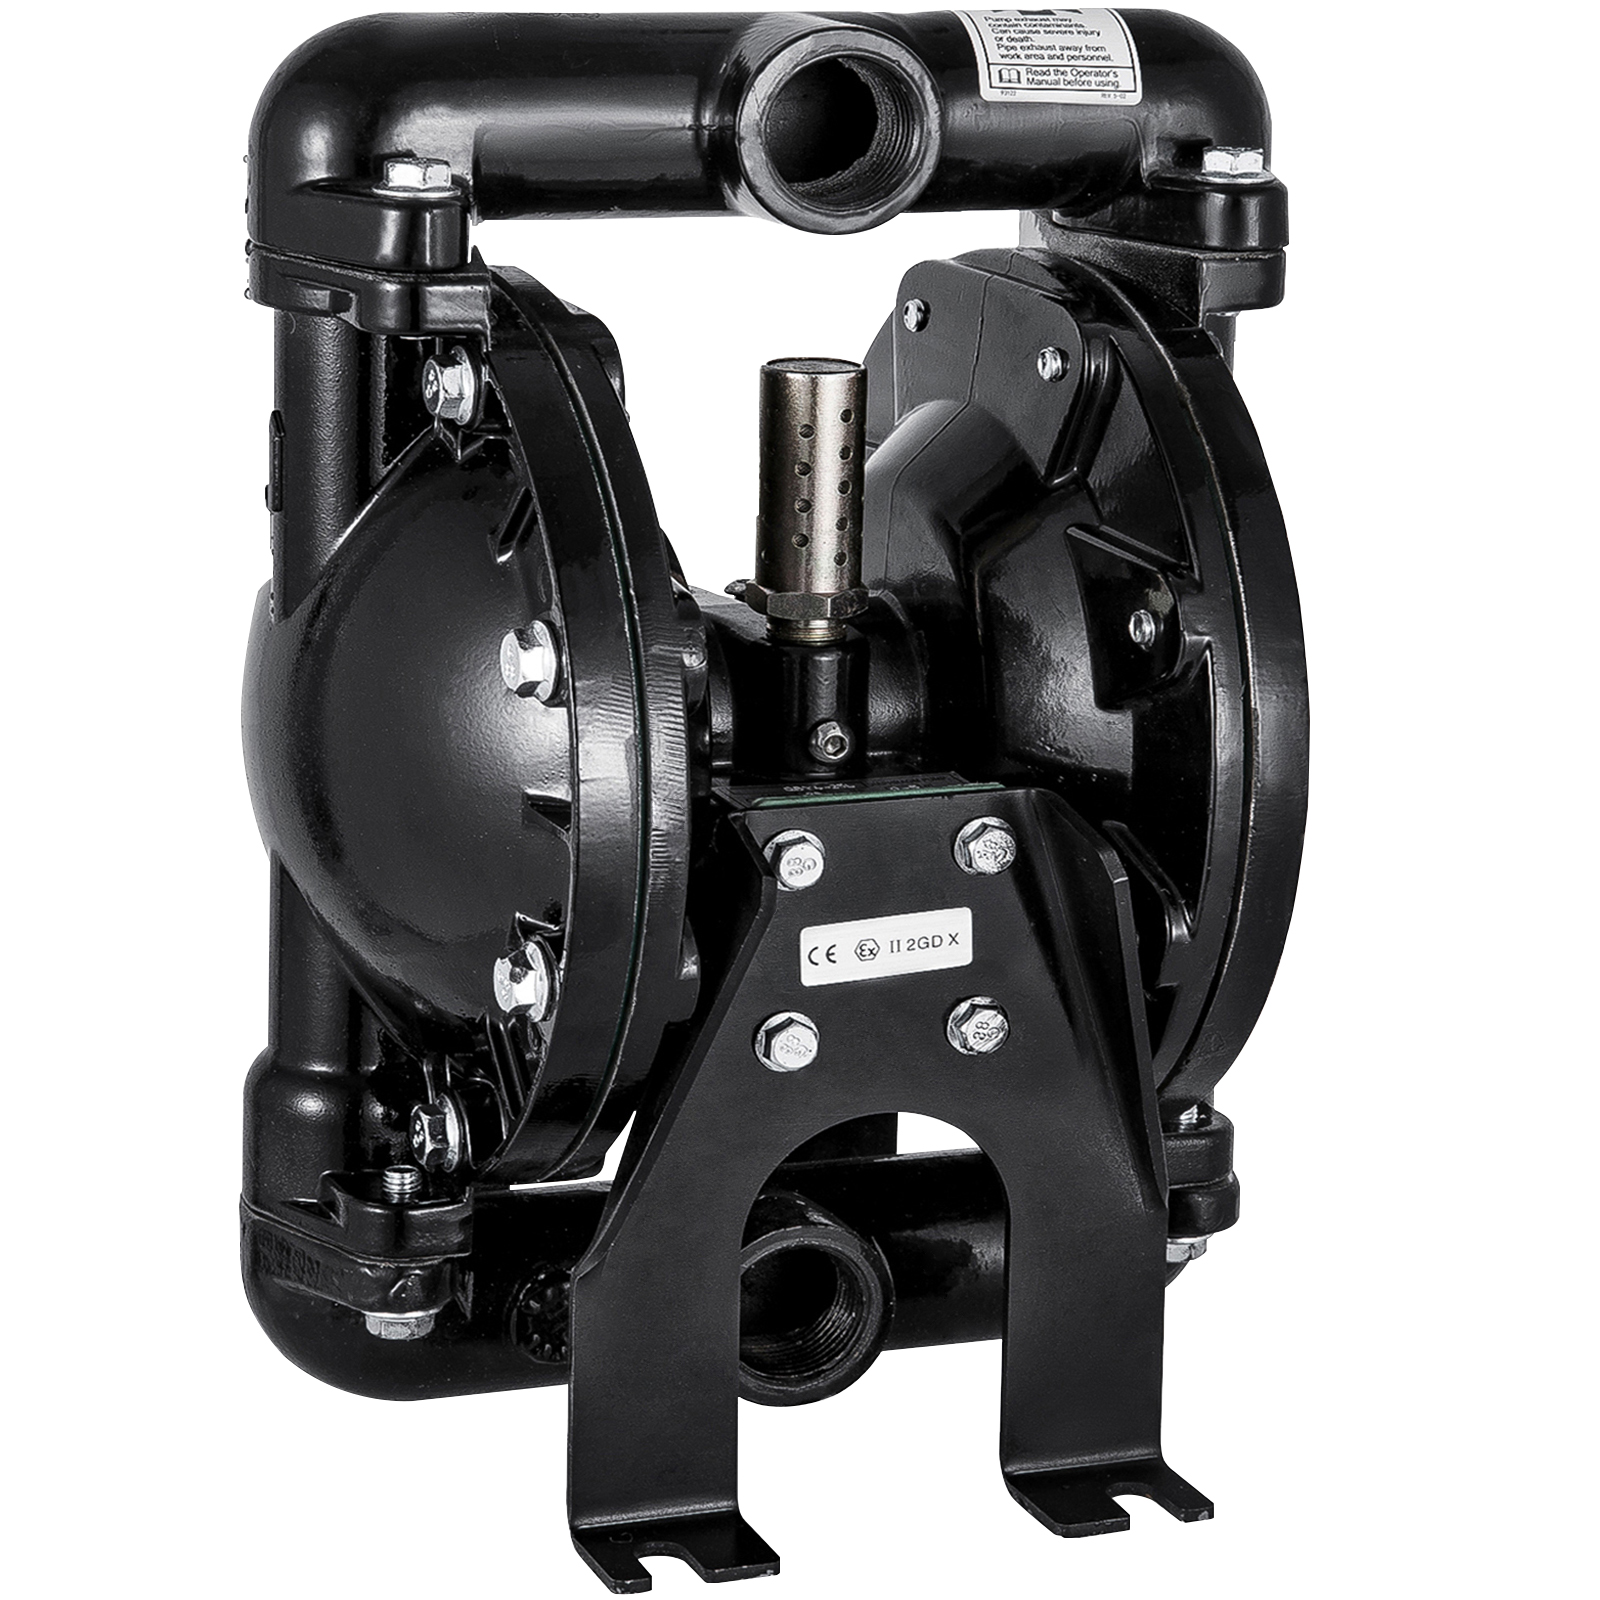 Air-Operated Double Diaphragm Pump 1" Inlet Outlet 35GPM Petroleum Fluids F46 от Vevor Many GEOs